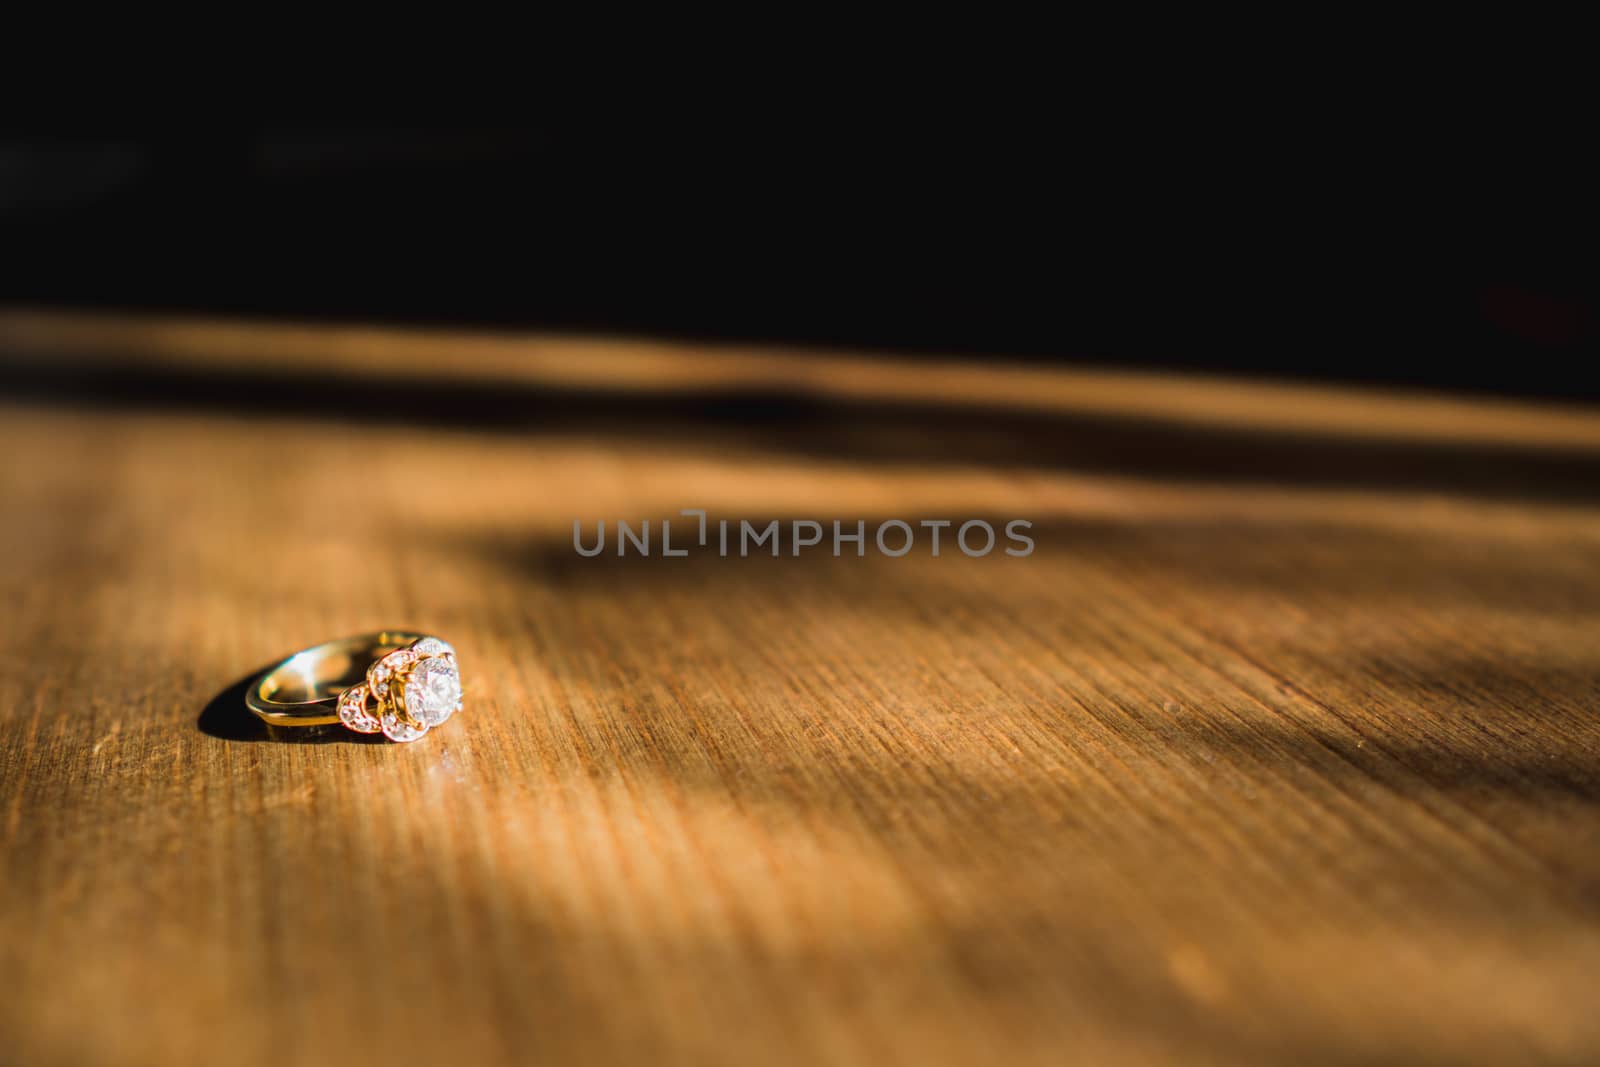 A gold diamond engagement ring sat on a wooden table in natural daylight